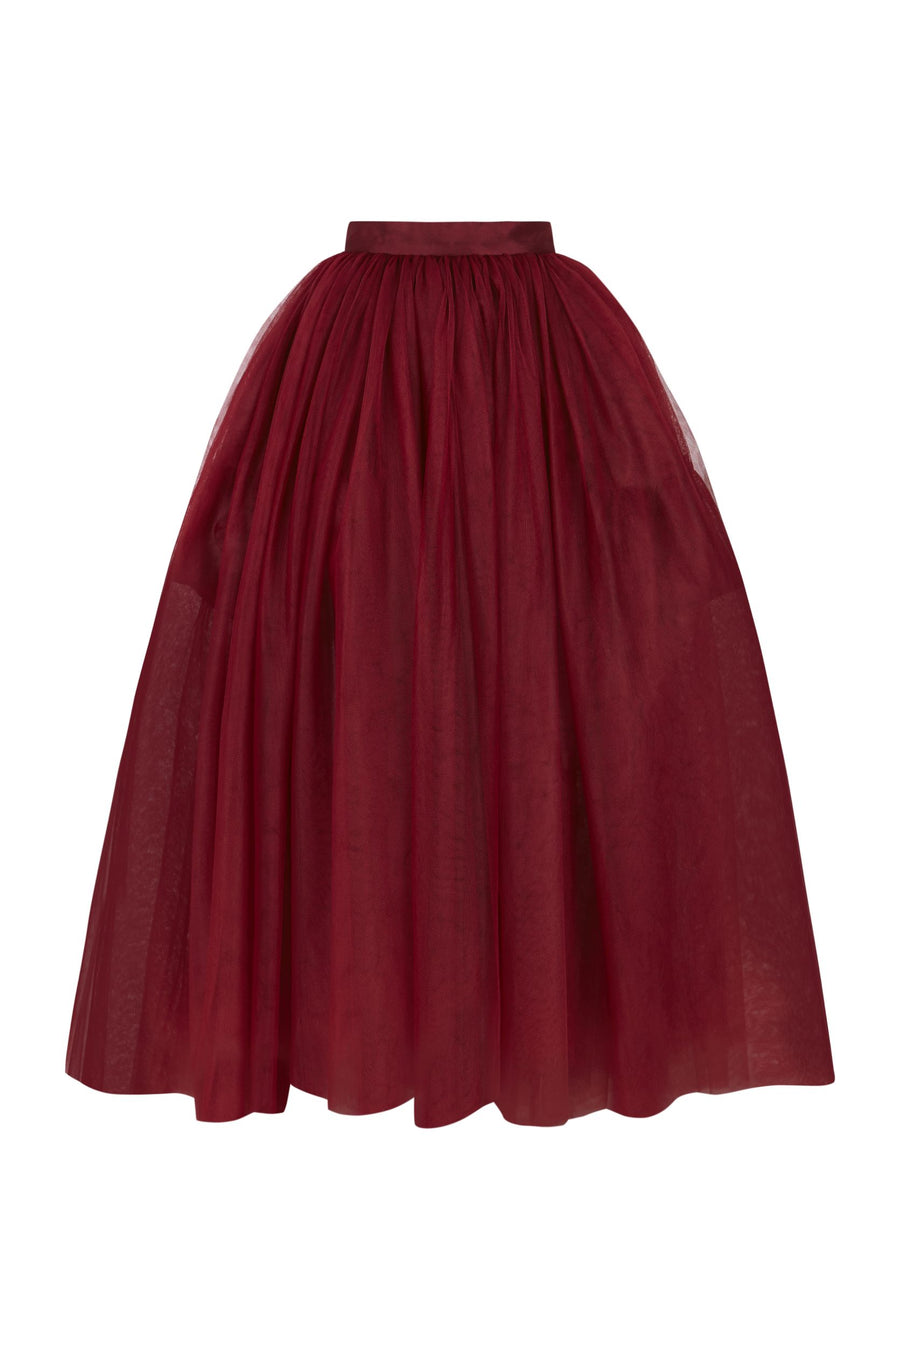 THE 2ND SKIN MIDI LENGTH TULLE SKIRT IN BORDEAUX. Available in two colours - Bordeaux and Marine